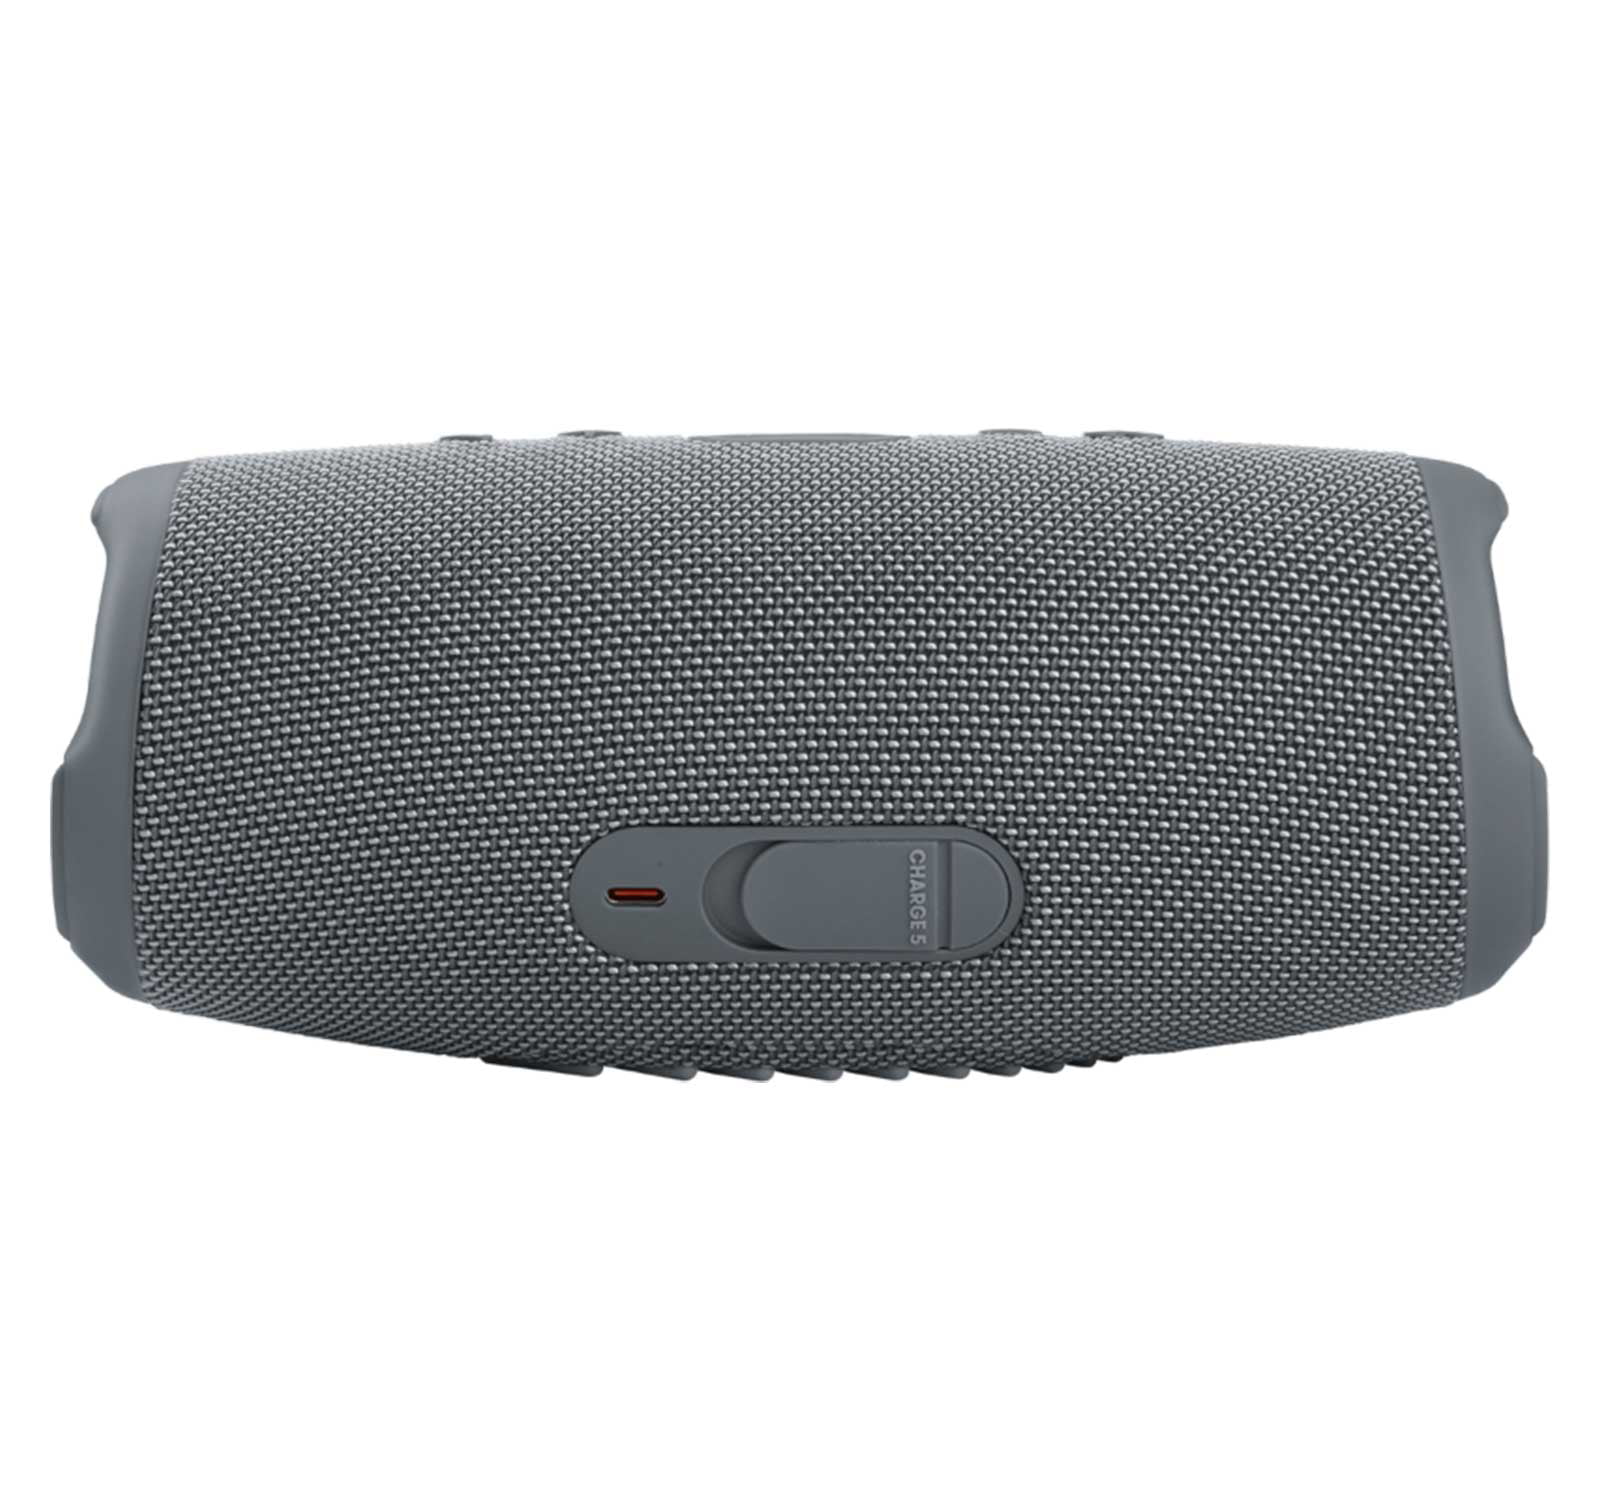 Tante spin ressource JBL Charge 5 Gray Bluetooth Speaker (Used) - Walmart.com